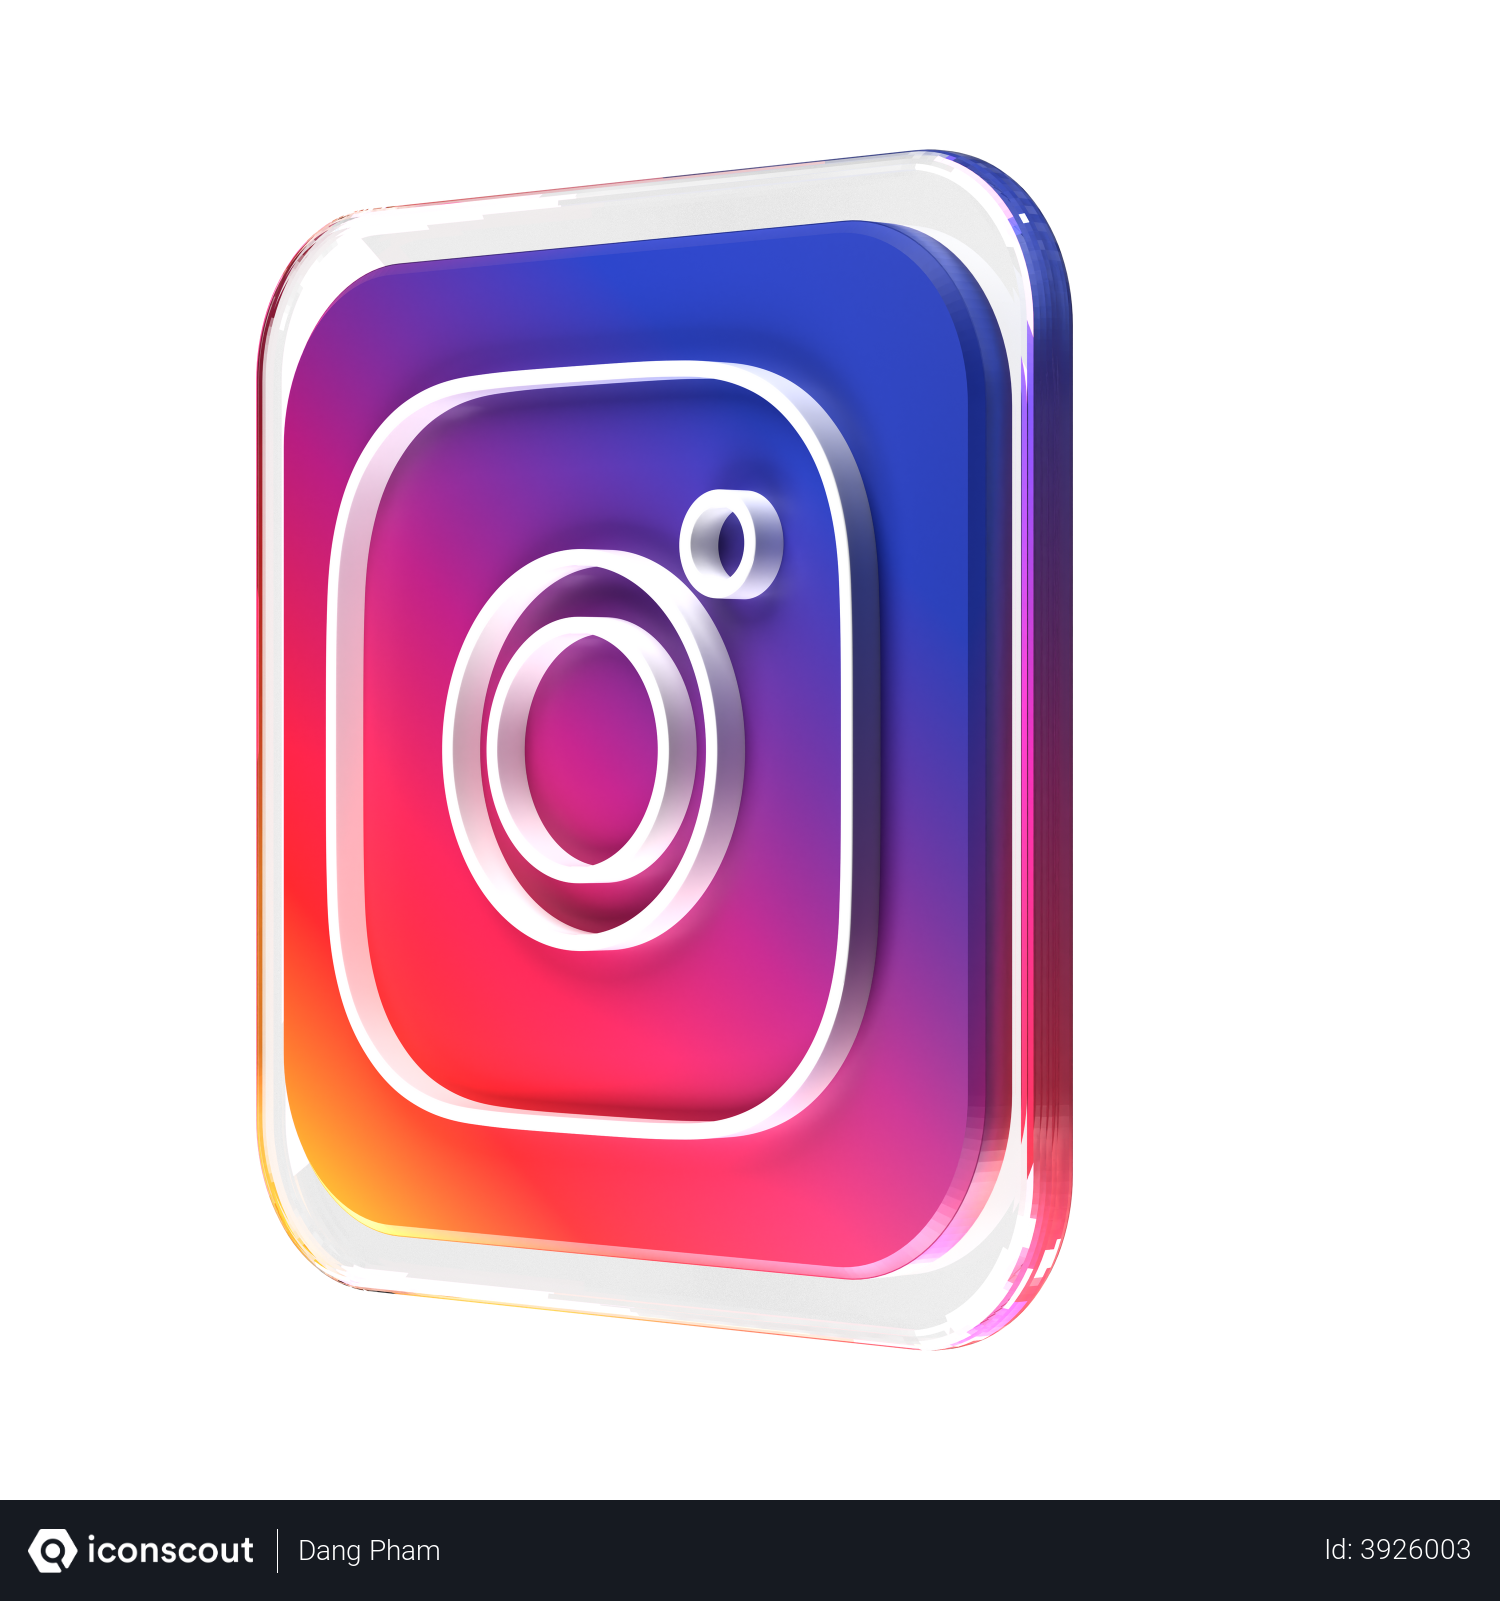 Instagram 3d Logo Photos and Images & Pictures | Shutterstock